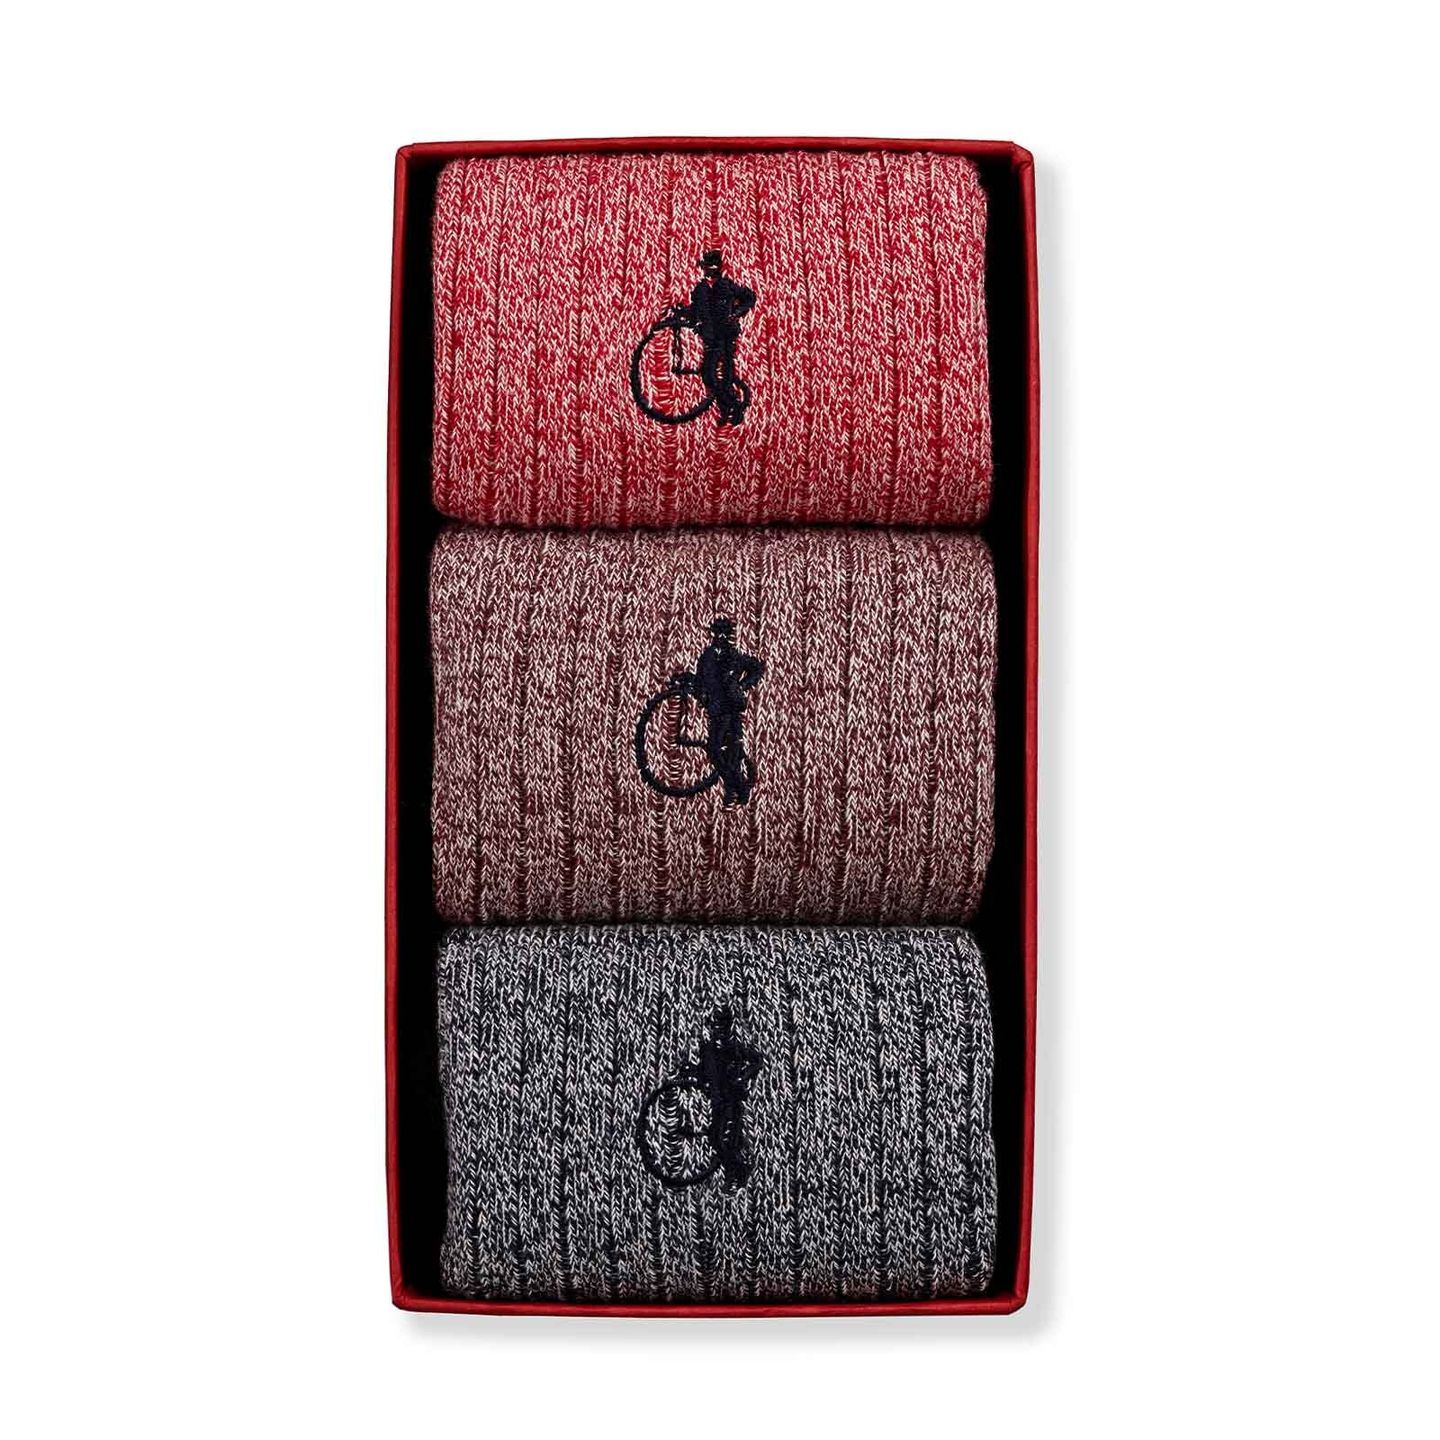 3 pair of marl casual boot socks in red, brown and black